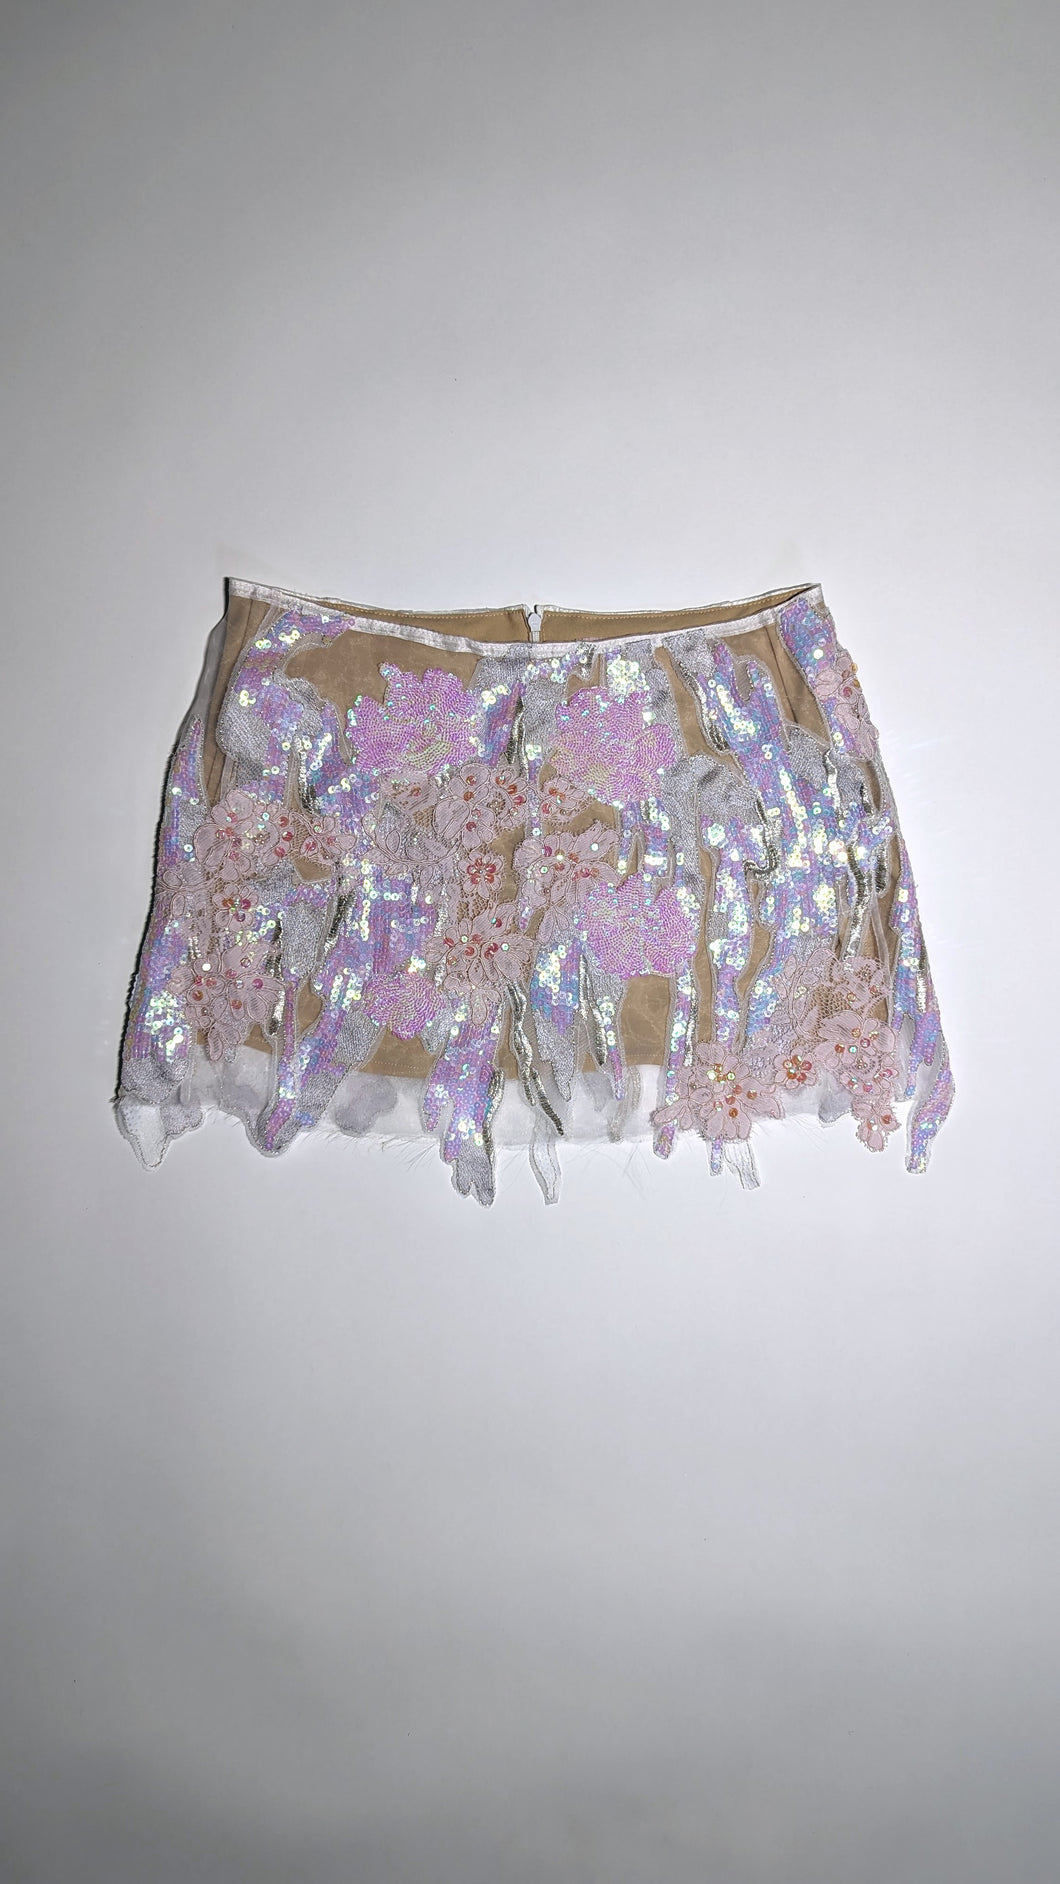 Skirt with Lace & Sequin Flowers